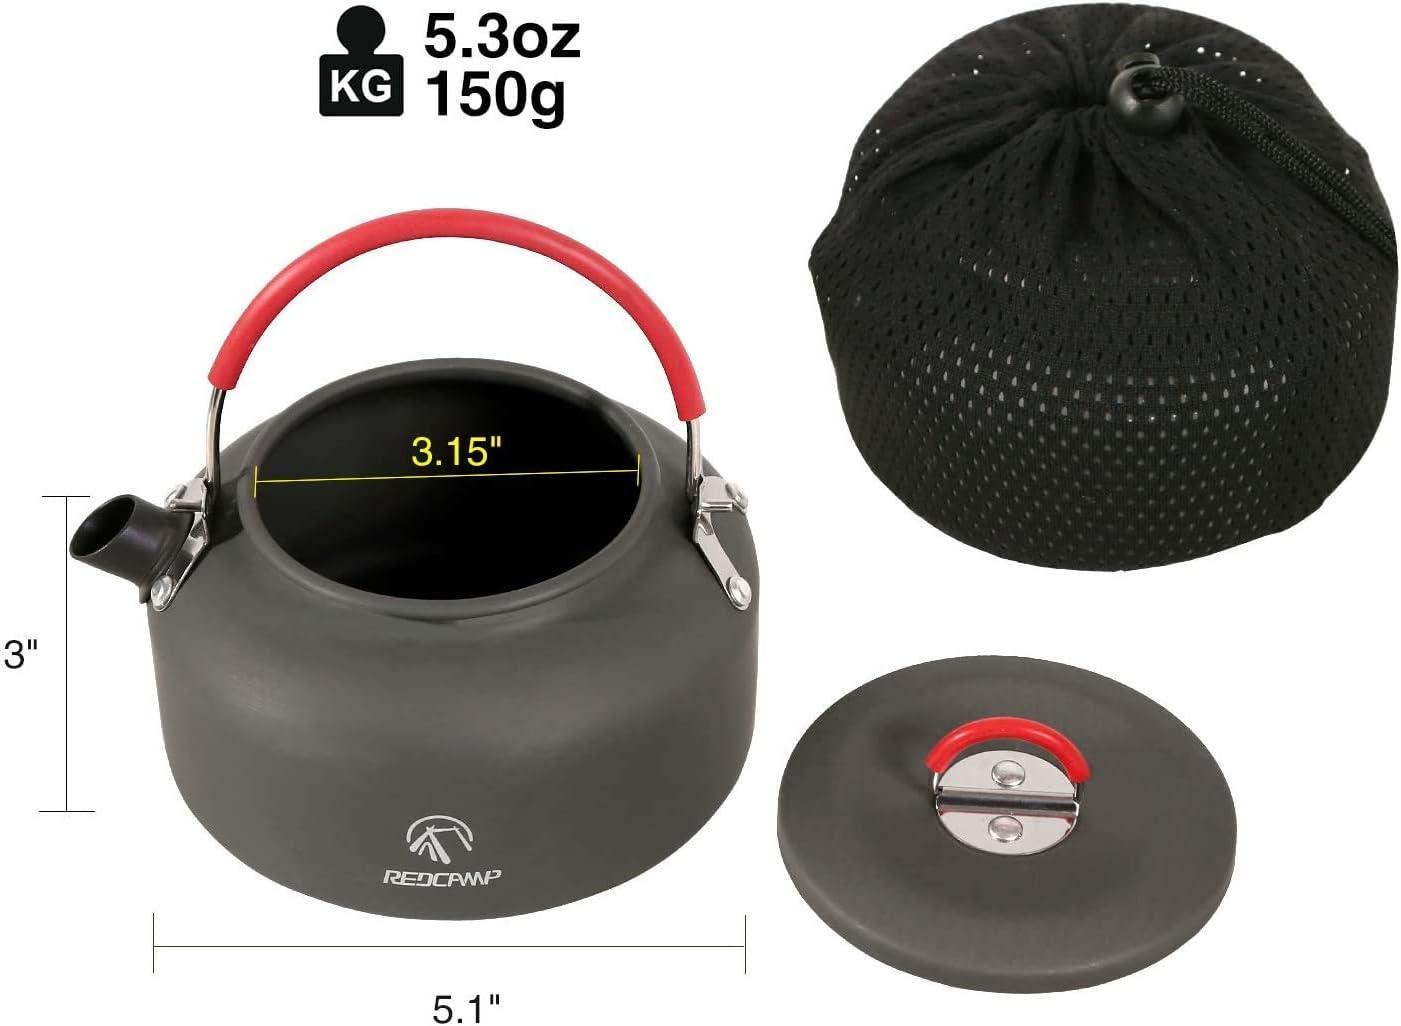 REDCAMP 0.8L/0.9L/1.4L Outdoor Camping Kettle, Aluminum Tea Kettle with  Carrying Bag, Compact Lightweight Coffee Pot 0.8L Mini